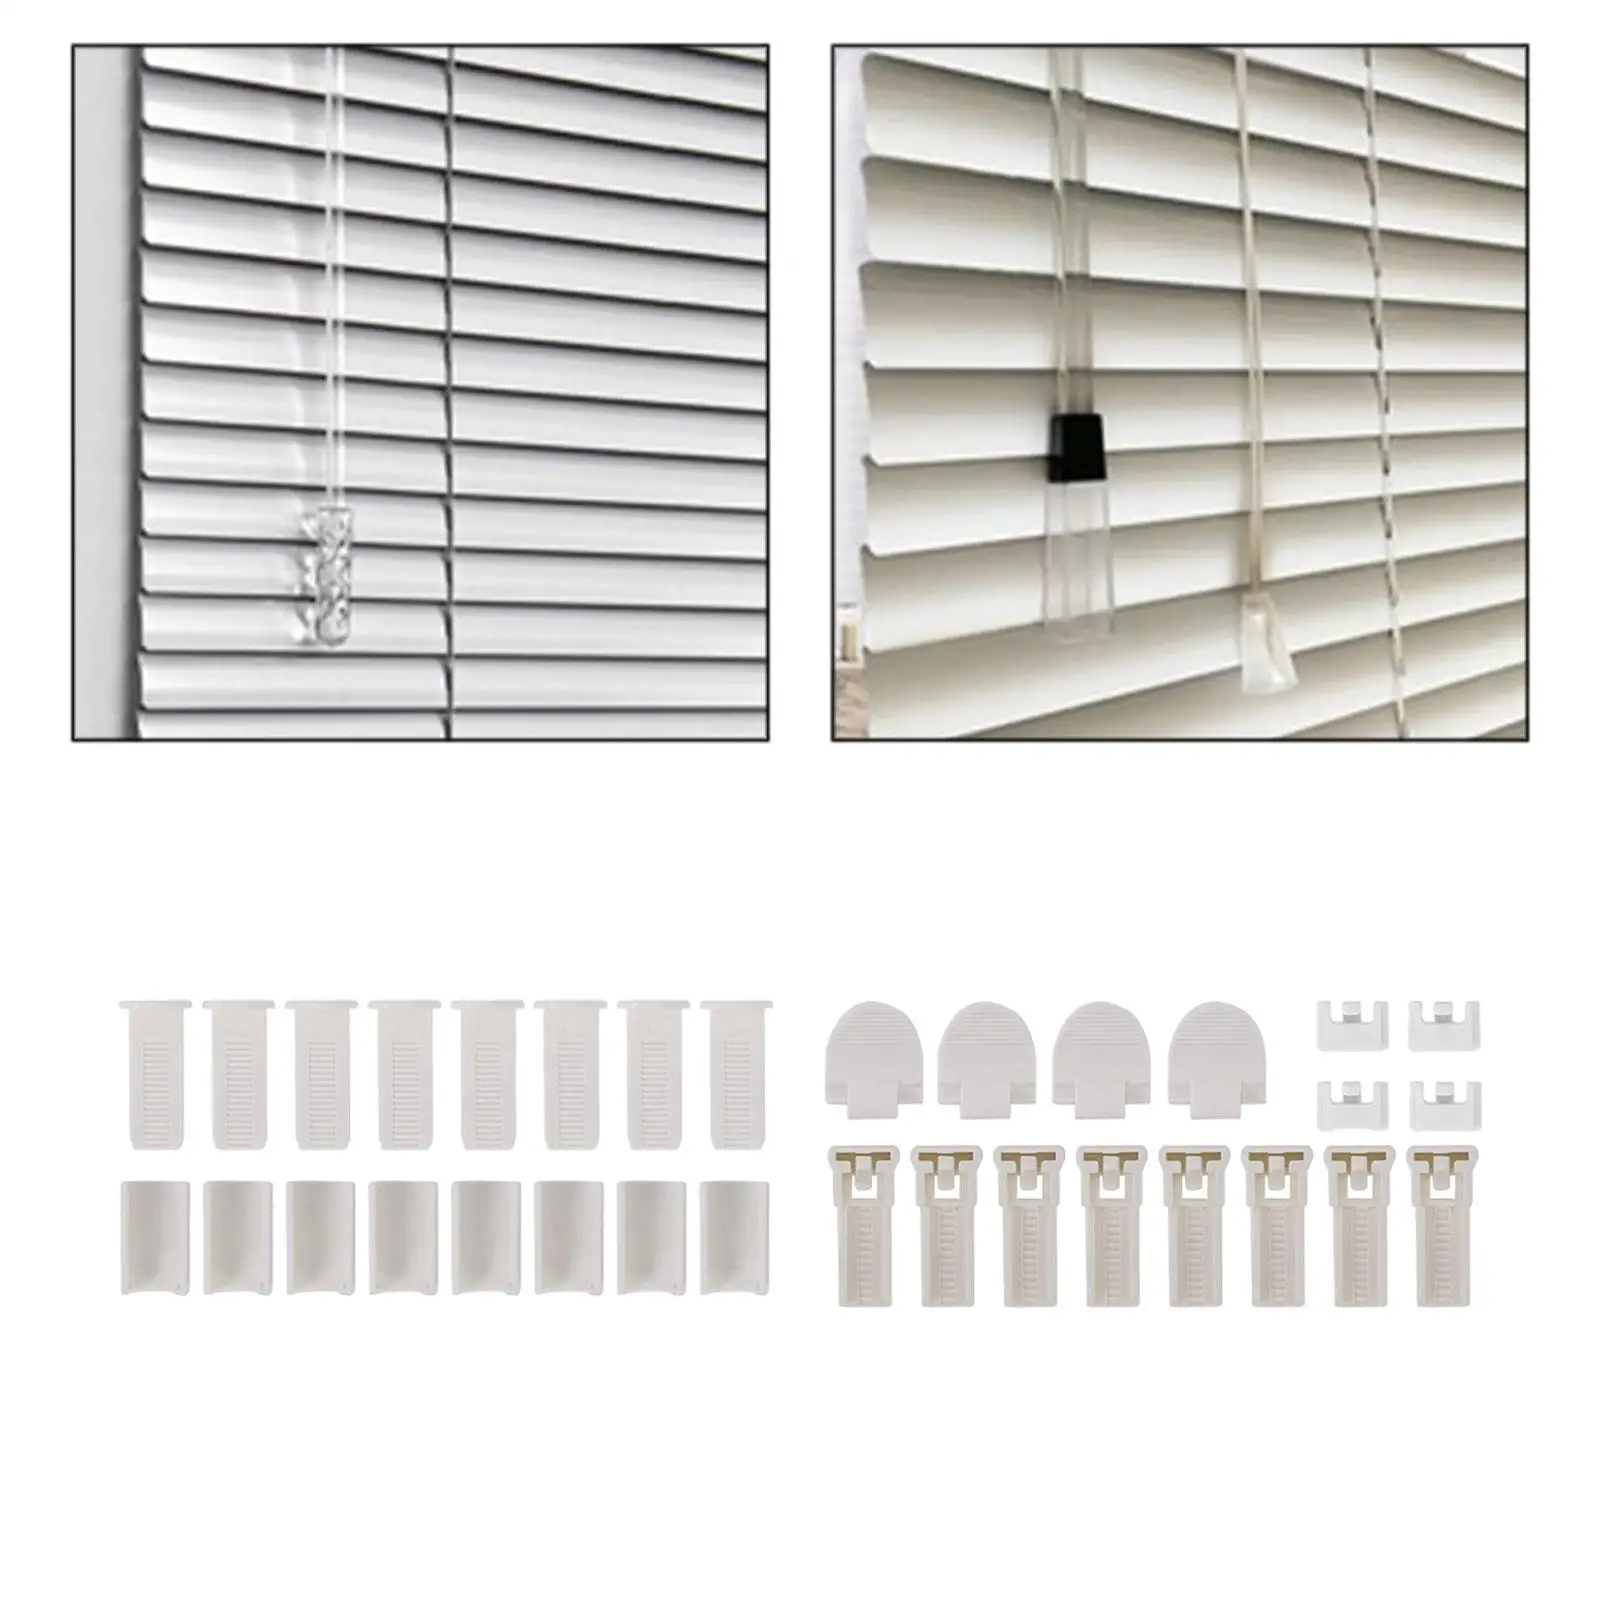 32x Vertical Blind Repair Set Easy to Use Vertical Blinds Replacement Slats